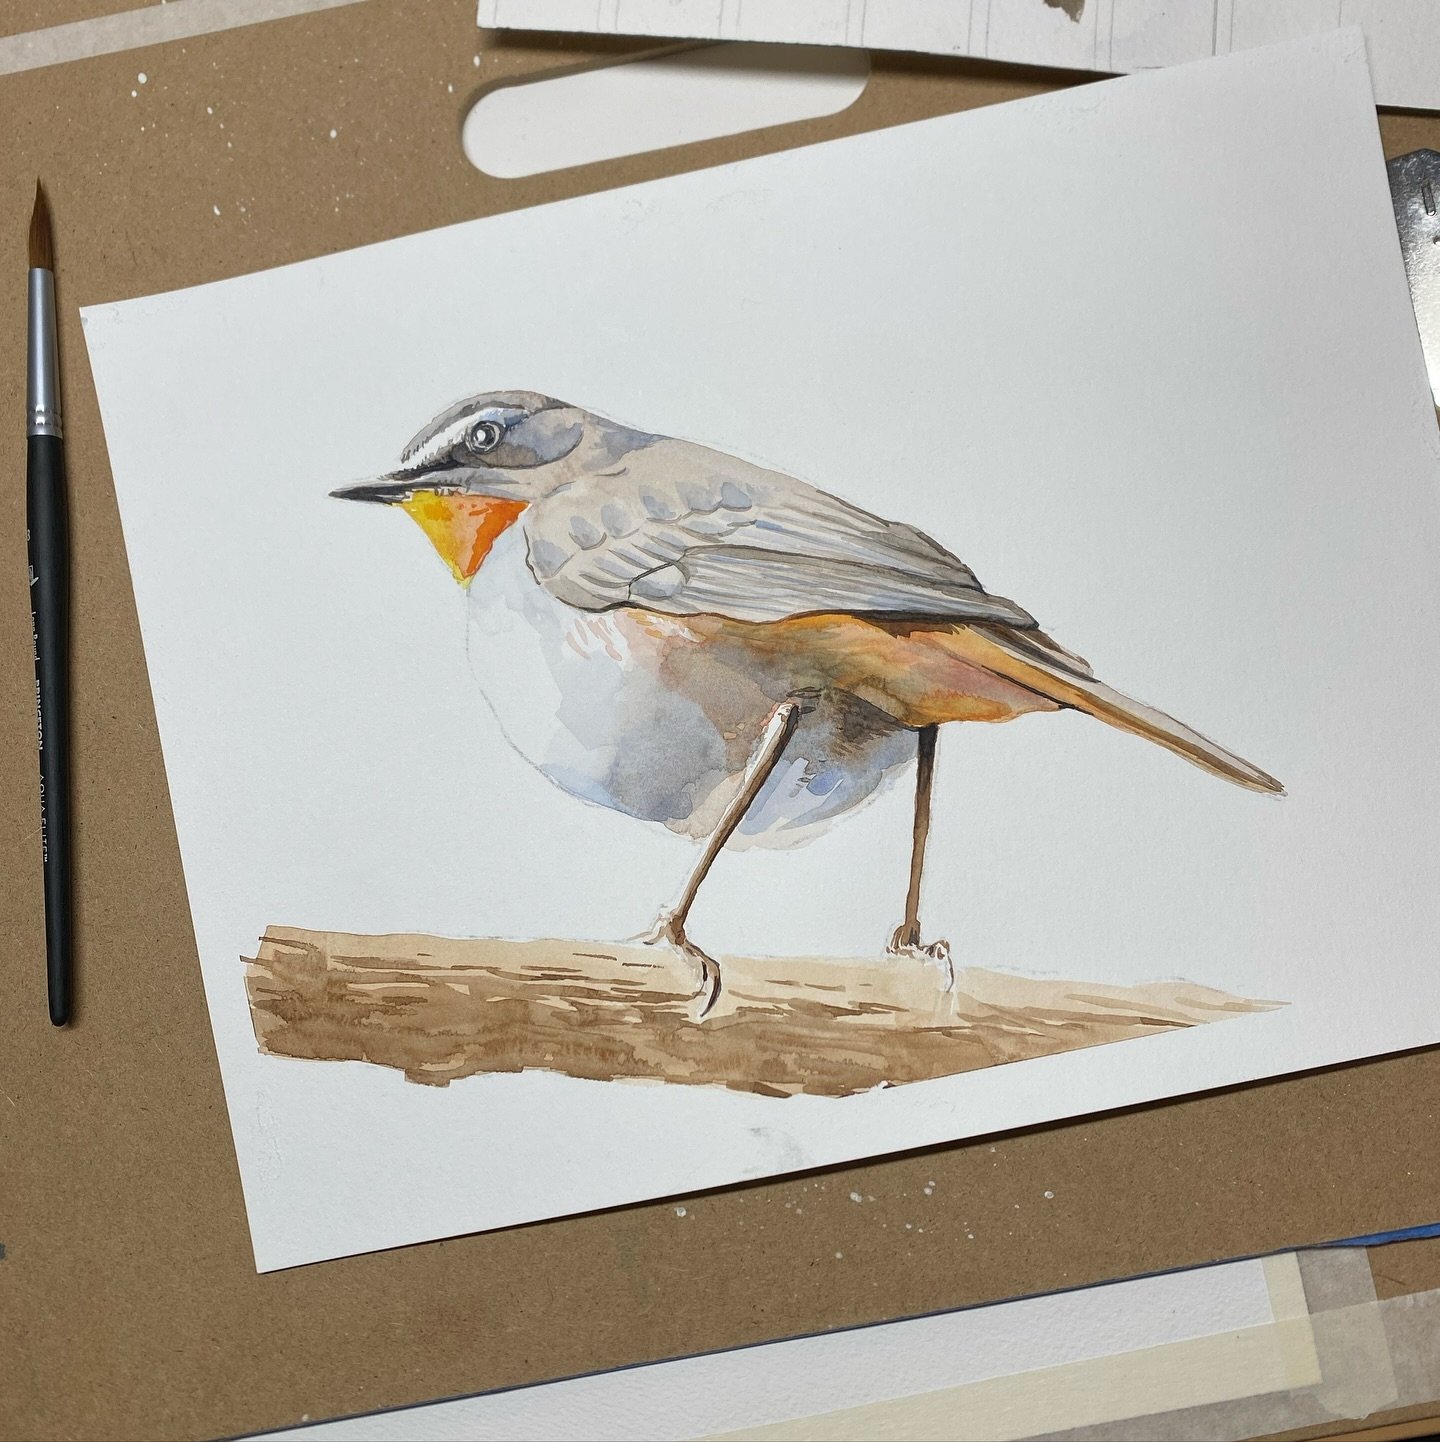 My Robin from the hour and a half workshop I taught at @artclasseswithmaryshadbolt this morning. Some students came with all their own supplies (and good supplies at that!) and some came with nothing at all - not even the experience of using a brush 